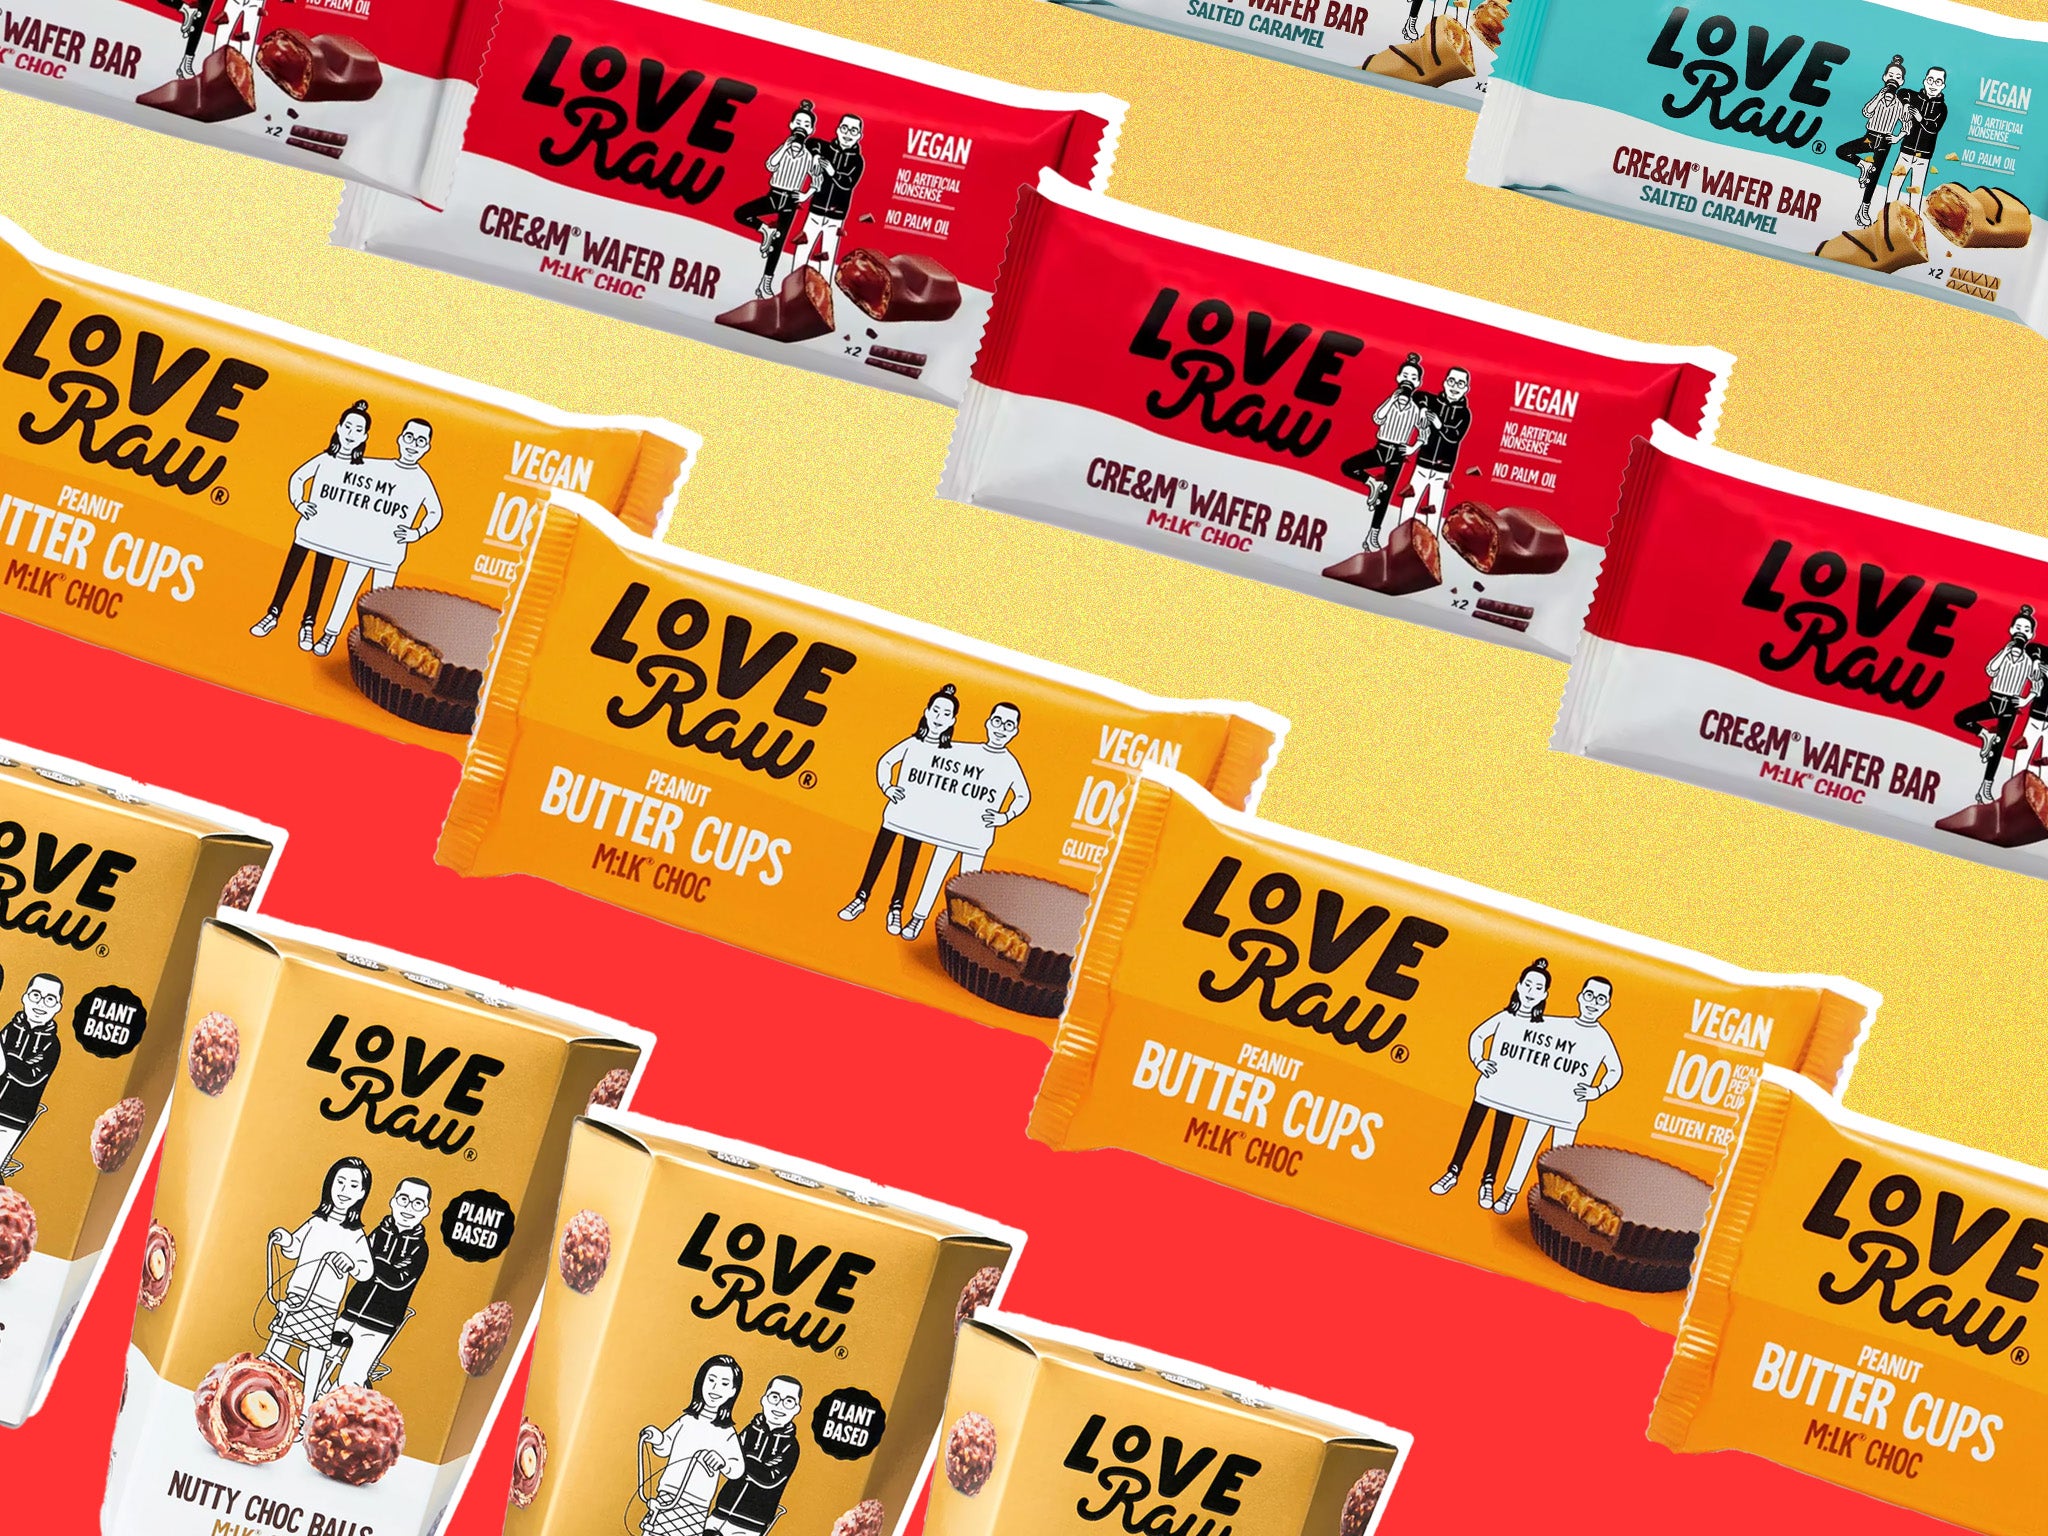 LoveRaw vegan chocolate review: Cream wafer bars, peanut butter cups and  more